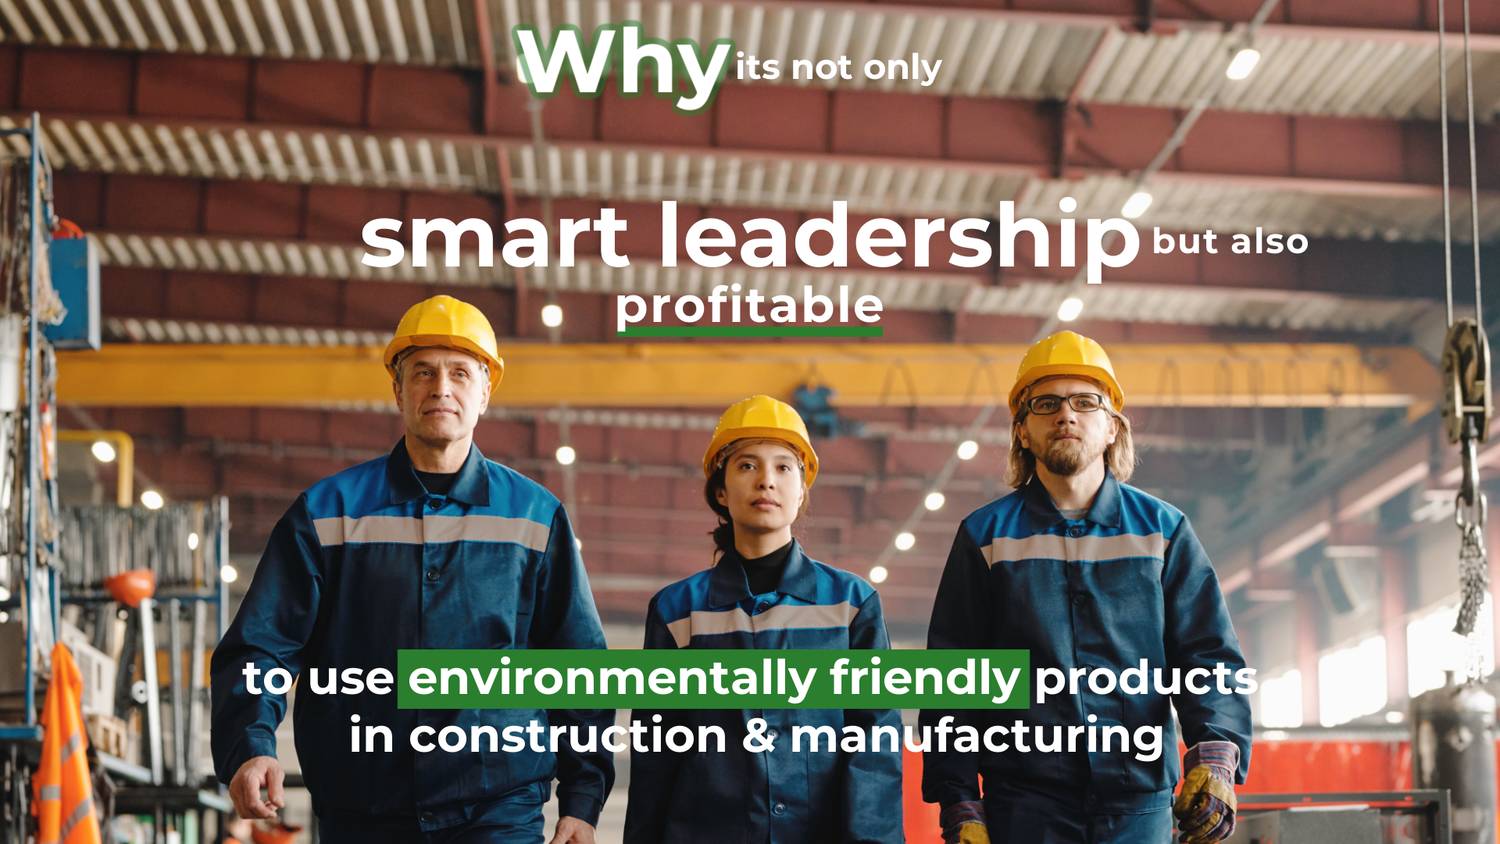 Using environmentally friendly products in construction, mining and manufacturing is not only smart but also profitable due to several reasons: